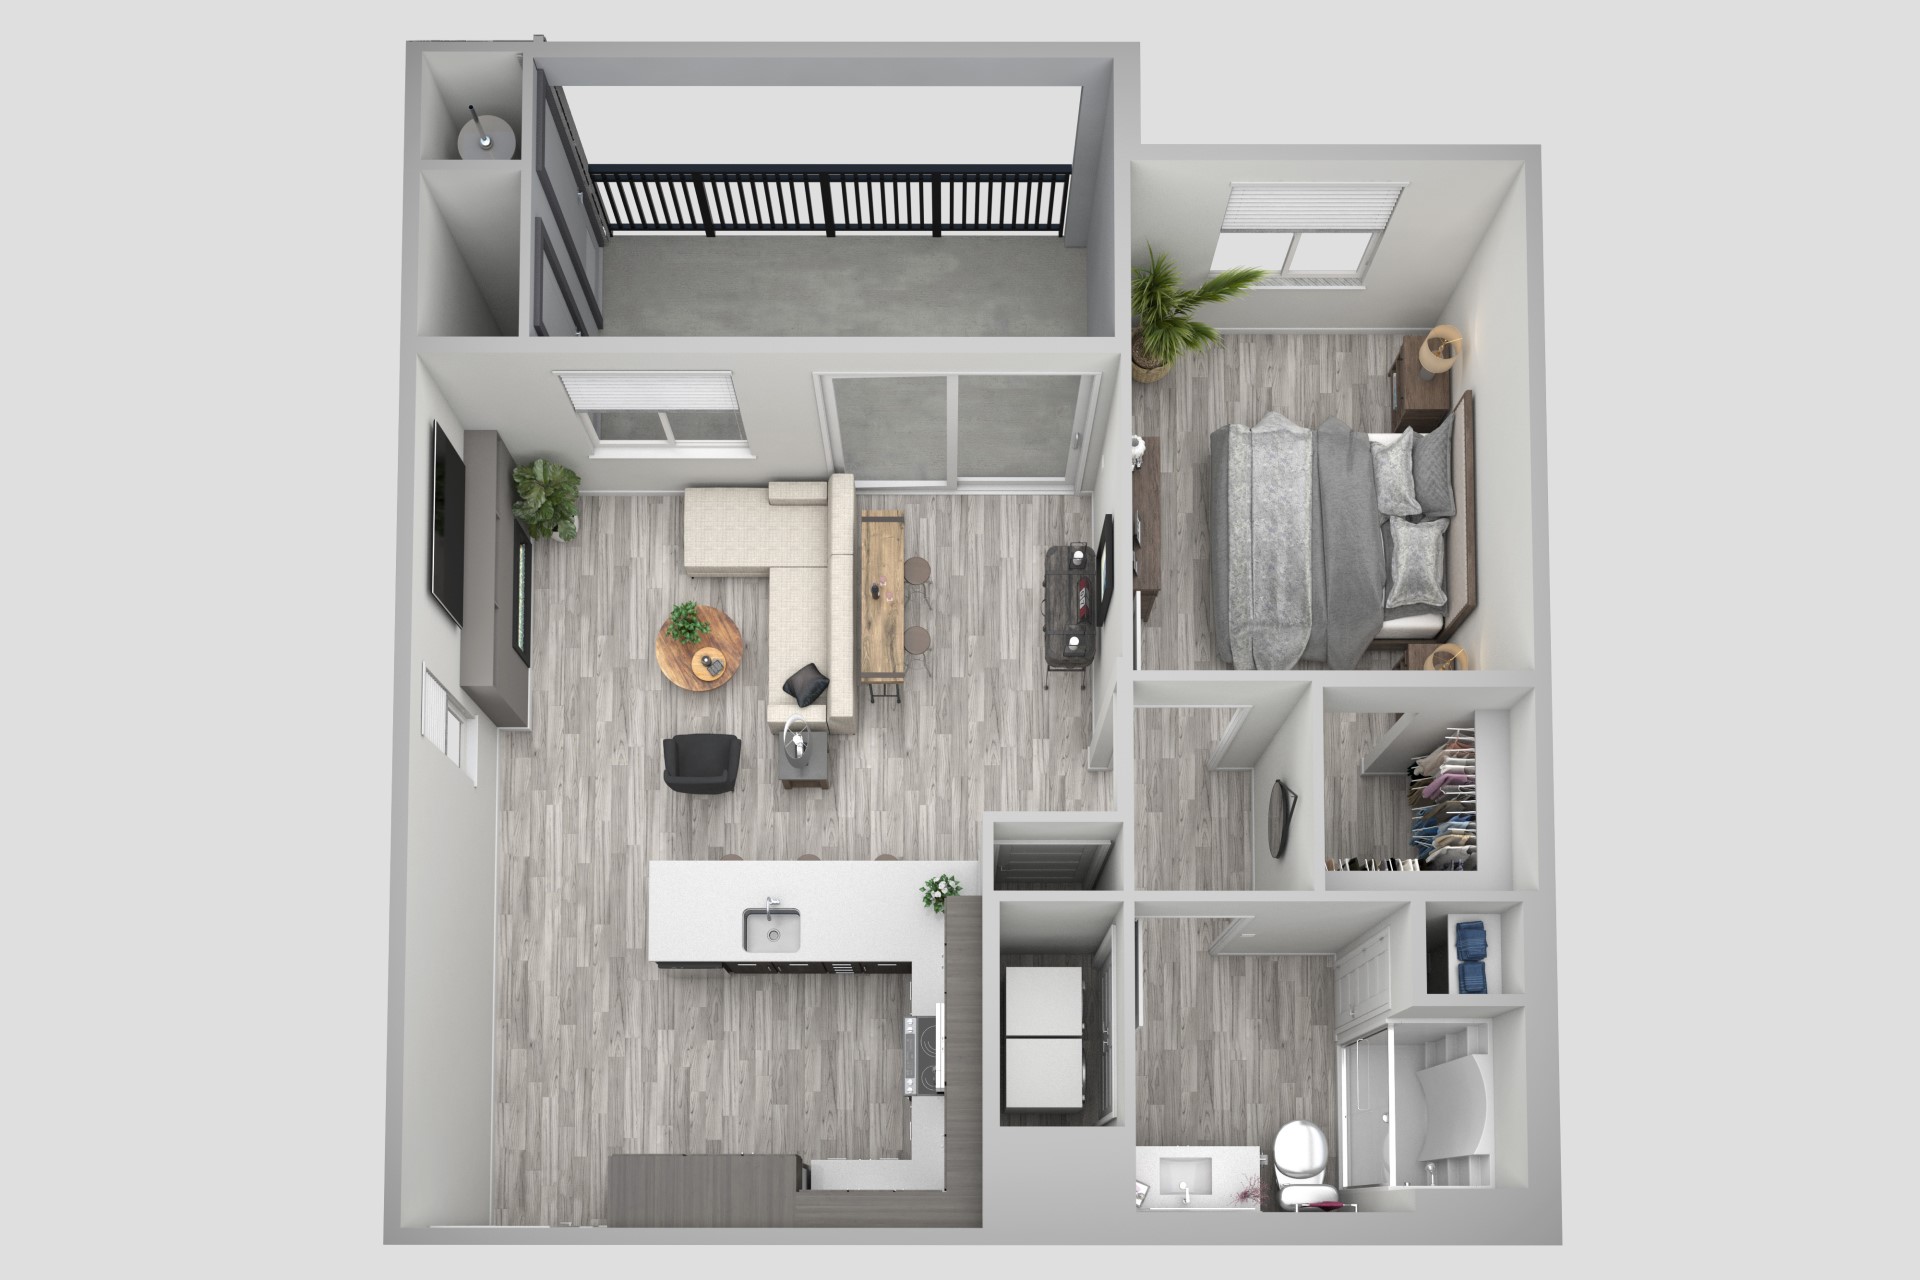 The Overlooks Apartments at Keystone Canyon - Reno NV - Floor Plan - The Sunset